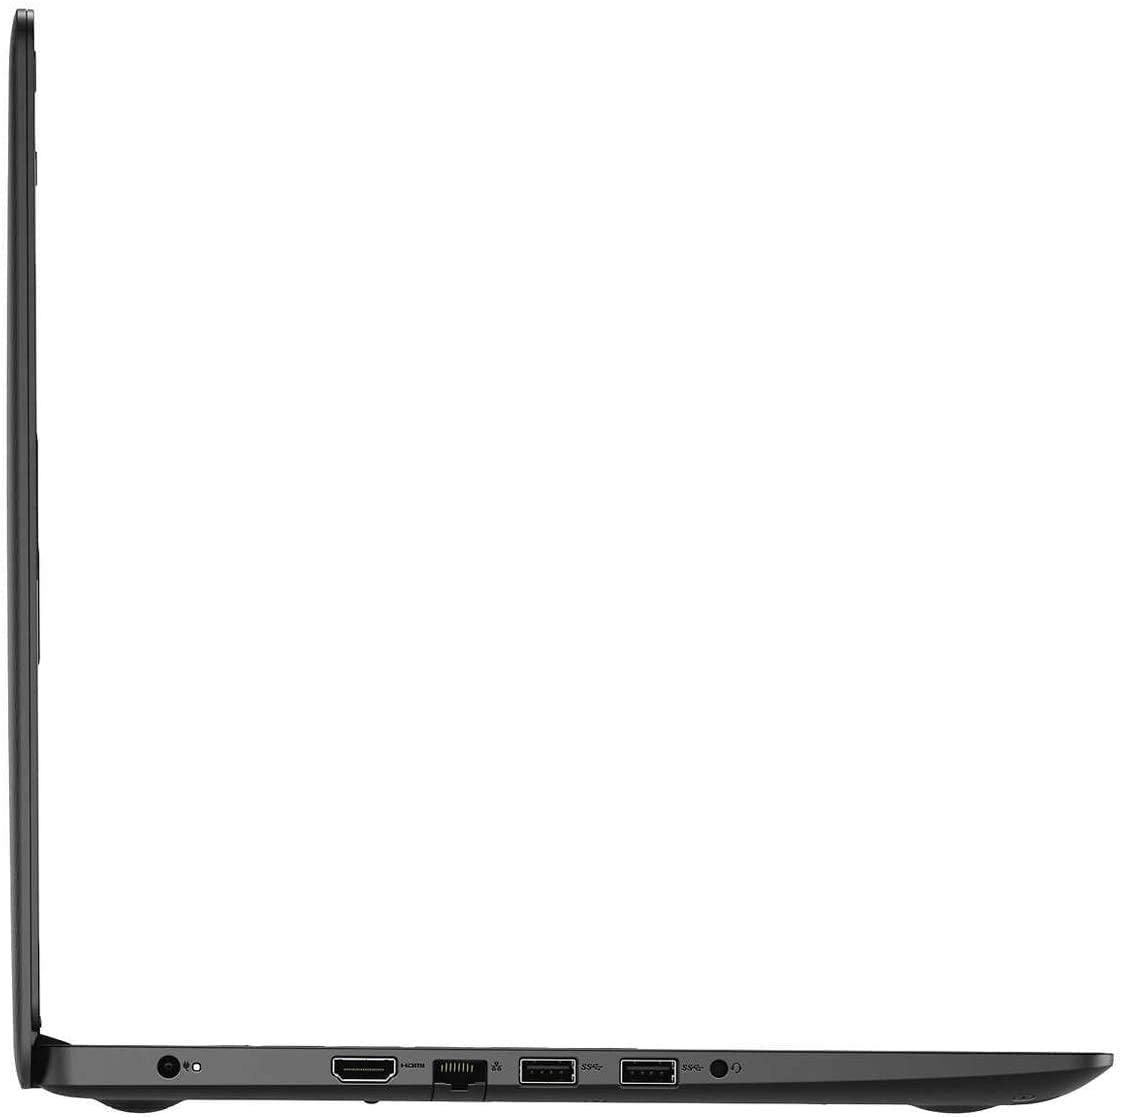 Dell Dell Inspiron laptop image